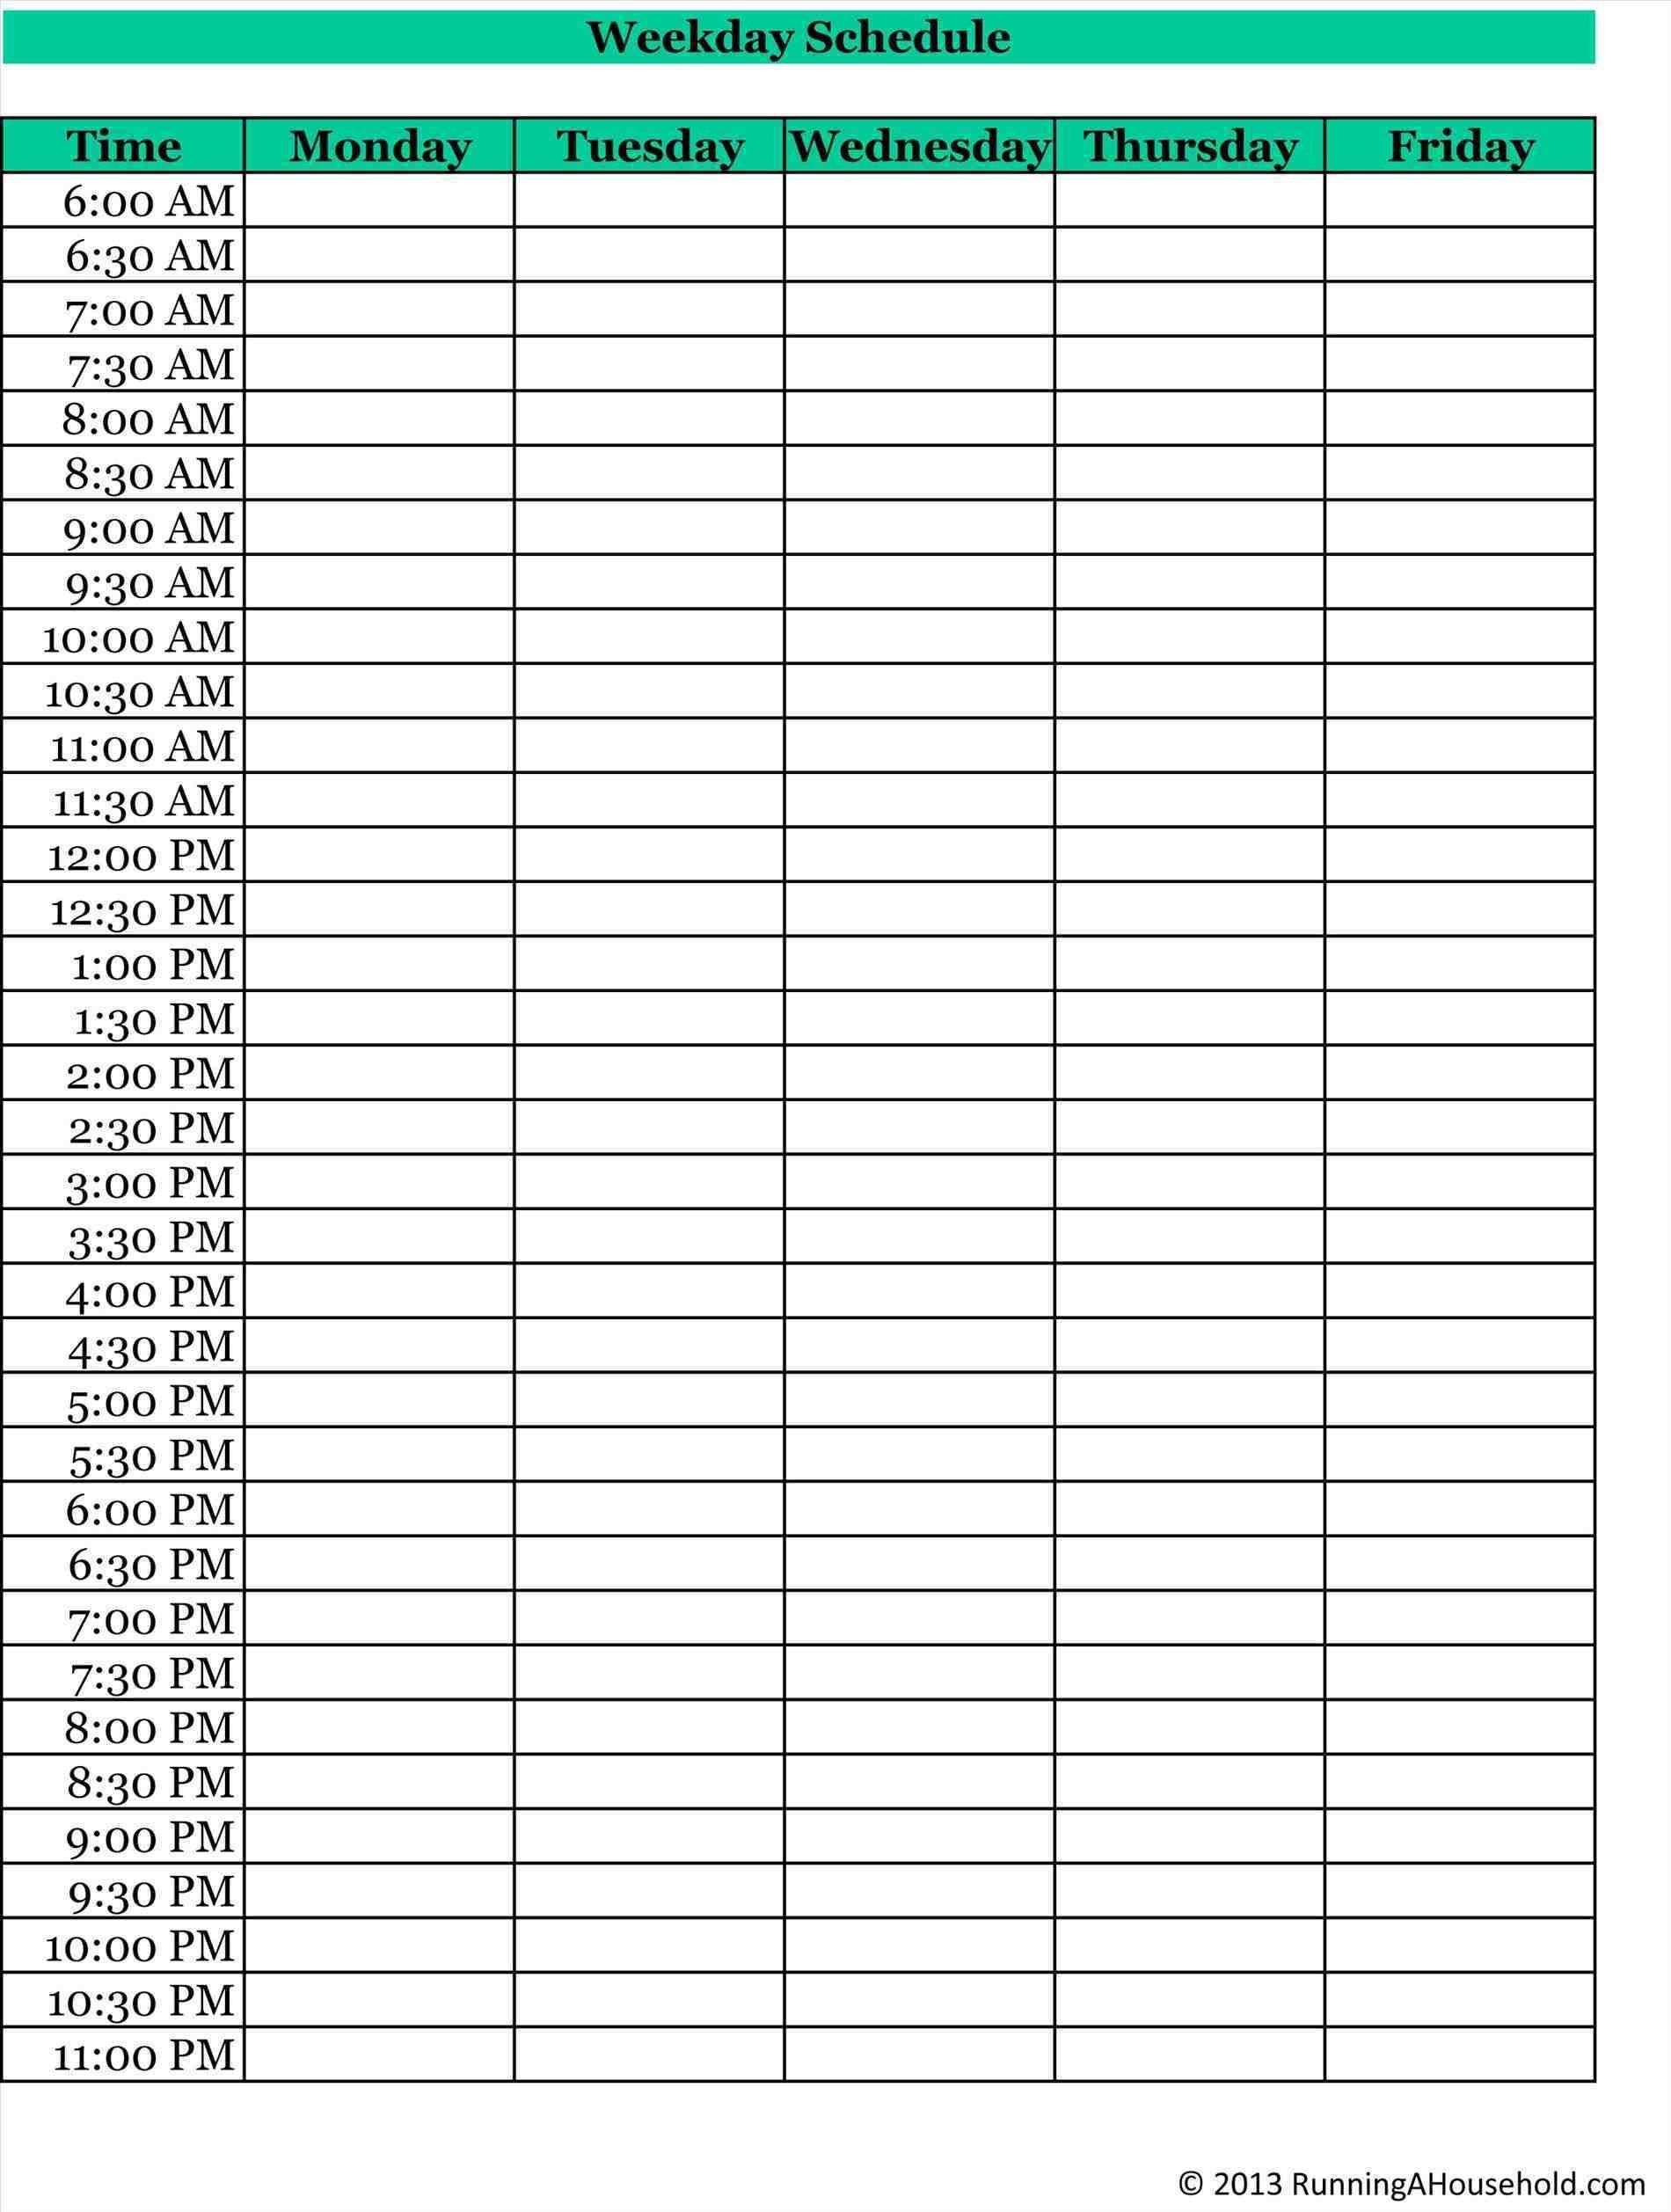 Daily Schedule Template 15 Minute Intervals Business